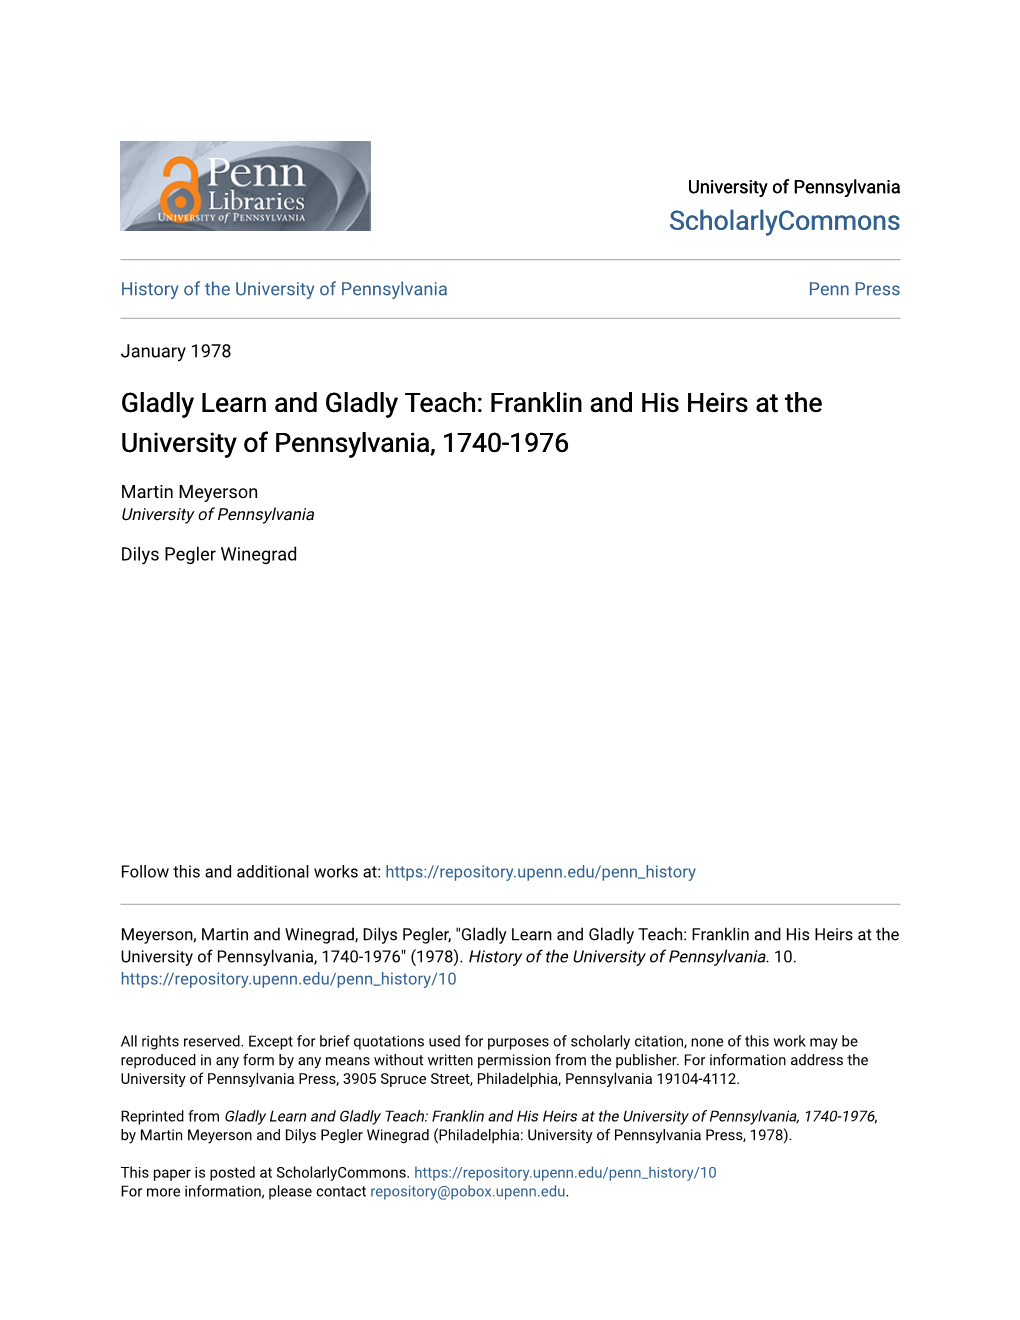 Gladly Learn and Gladly Teach: Franklin and His Heirs at the University of Pennsylvania, 1740-1976